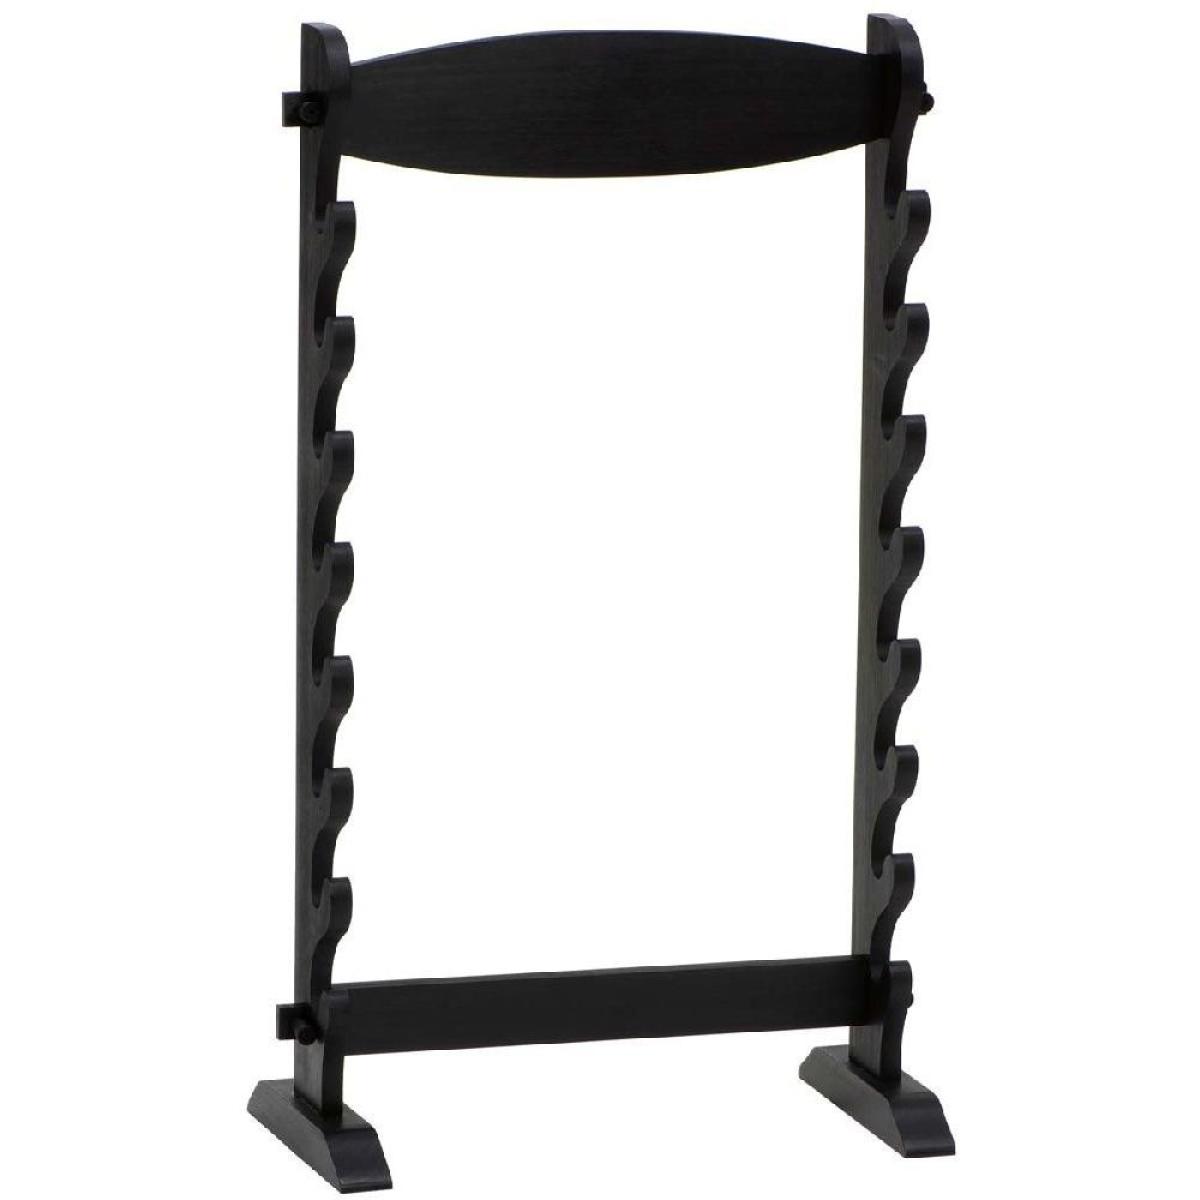 Floor sword stand for 8 weapons ➤ www.bokken-shop.de »Weapon stand for 8 katanas or 8 weapons - your Budo dealer!